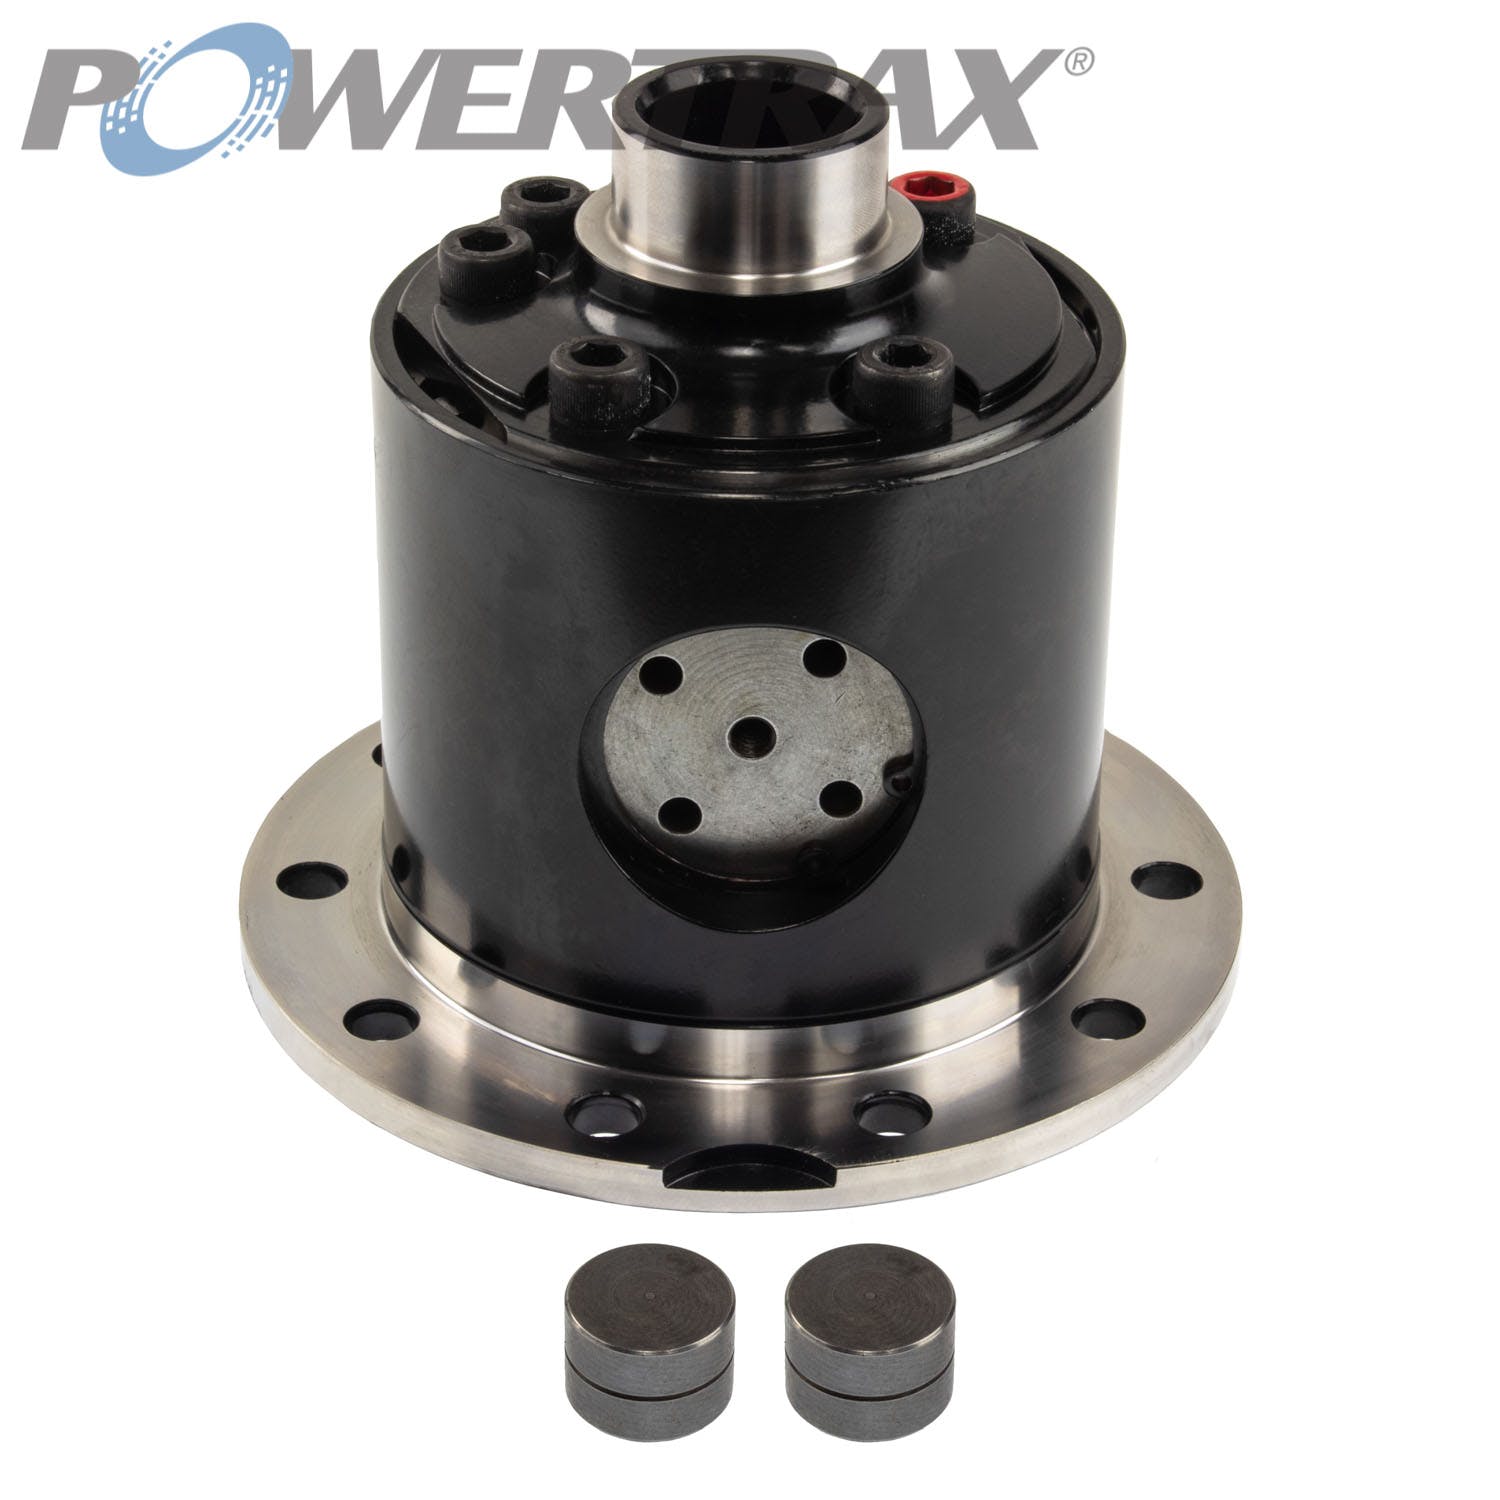 PowerTrax GT108834 Differential Carrier For Ford Super 8.8 inch; 34 Spline; 3.31 Carrier And Higher